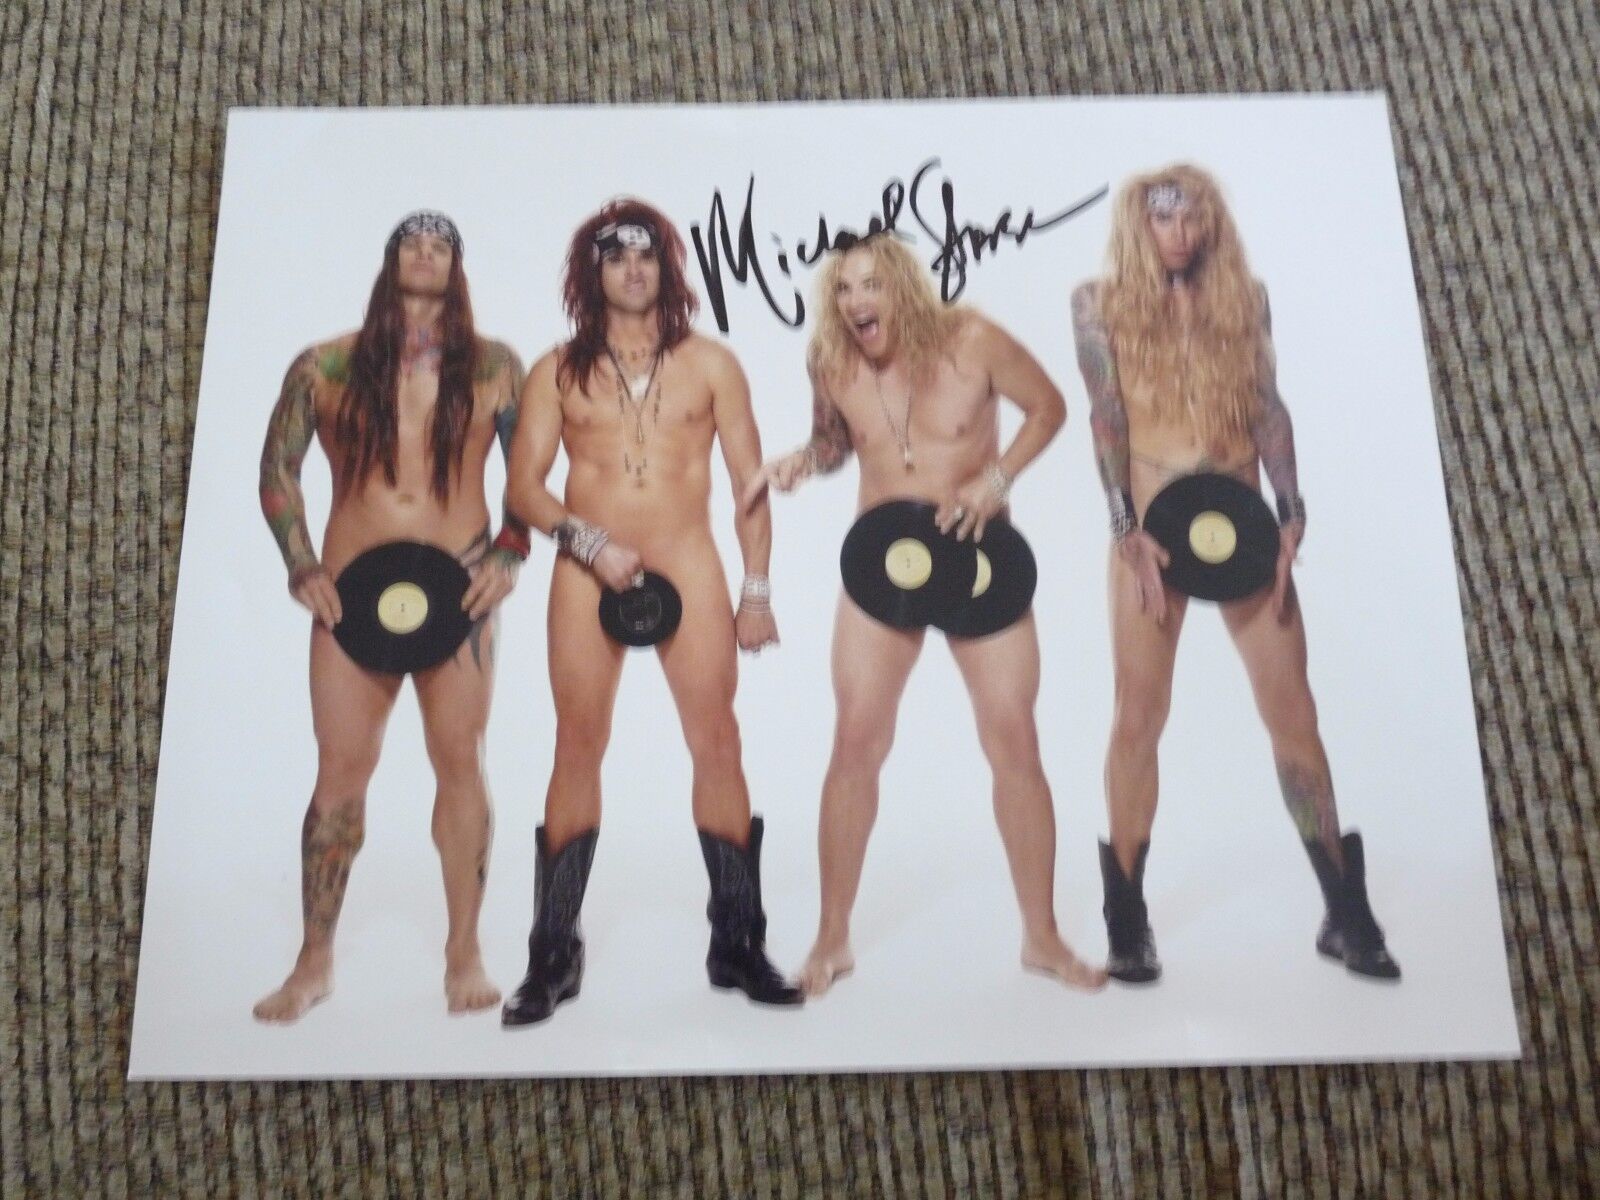 Steel Panther Michael Starr Signed Autographed 11x14 Photo Poster paintings PSA Guaranteed F1